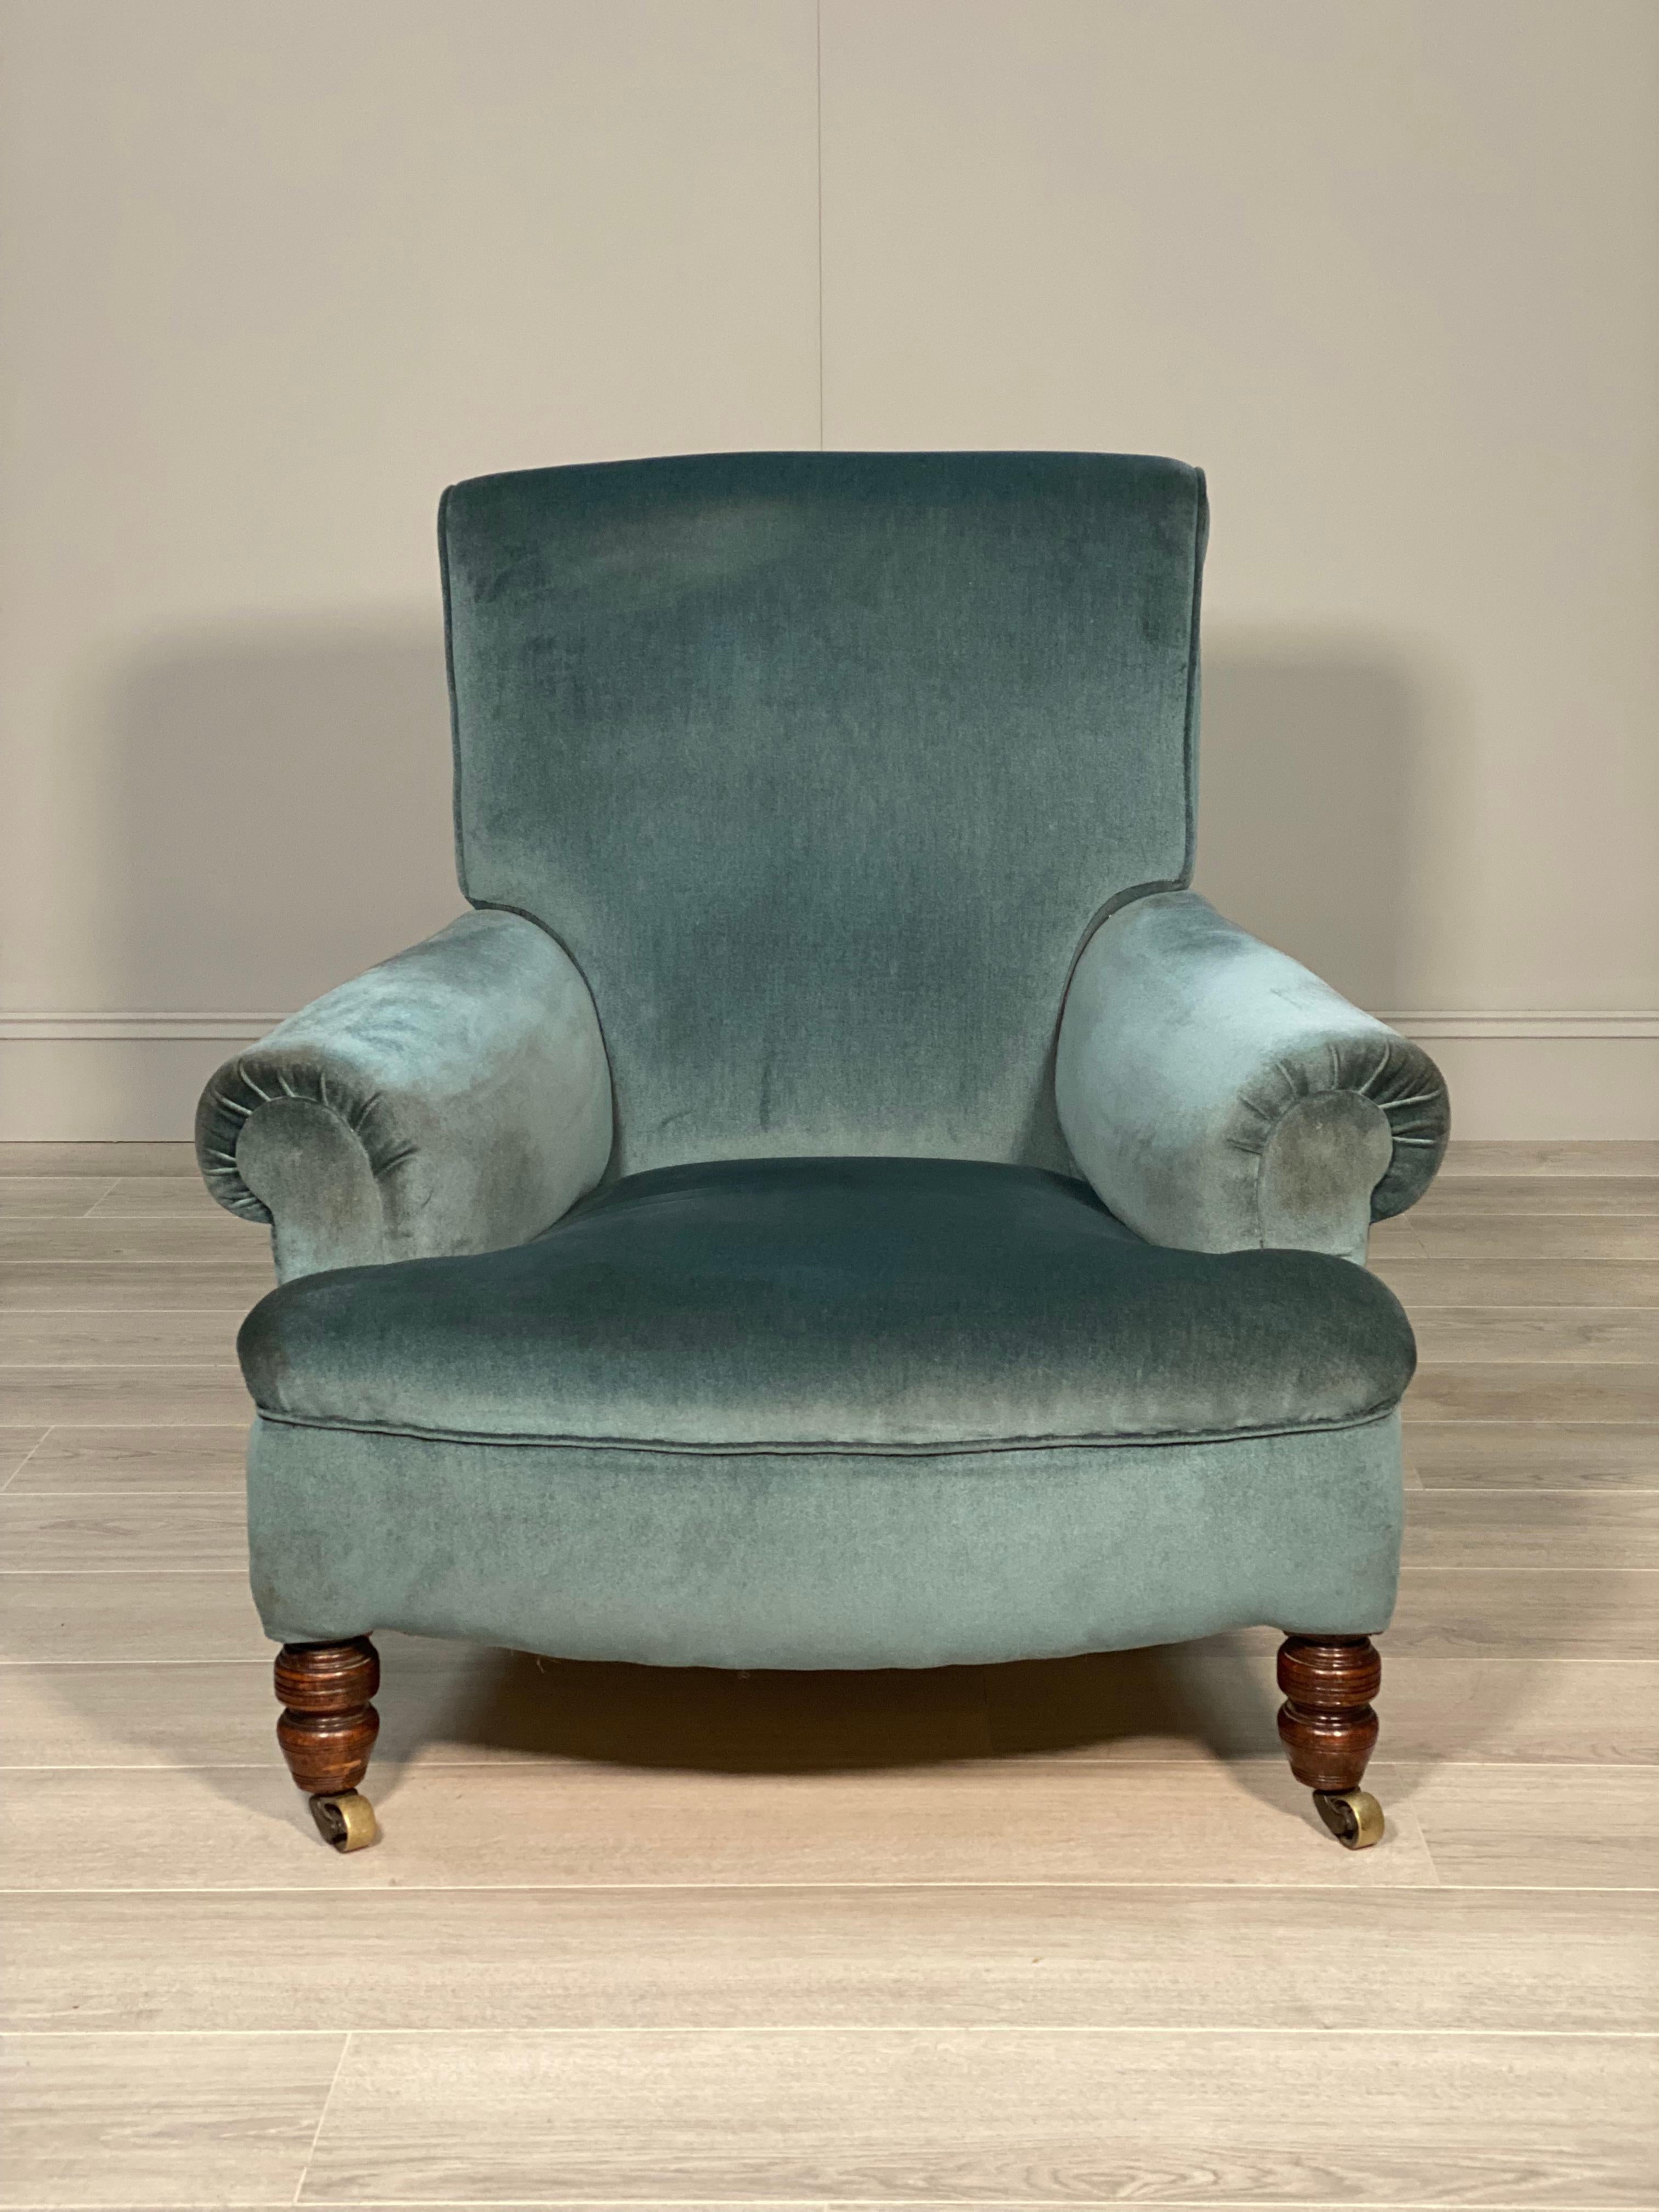 A deep seated country house Howard style armchair dating to the second half of the 19th century. The armchair sits on turned mahogany legs to the front and mahogany legs to the rear all with quality brass castors. The armchair has deep proportions